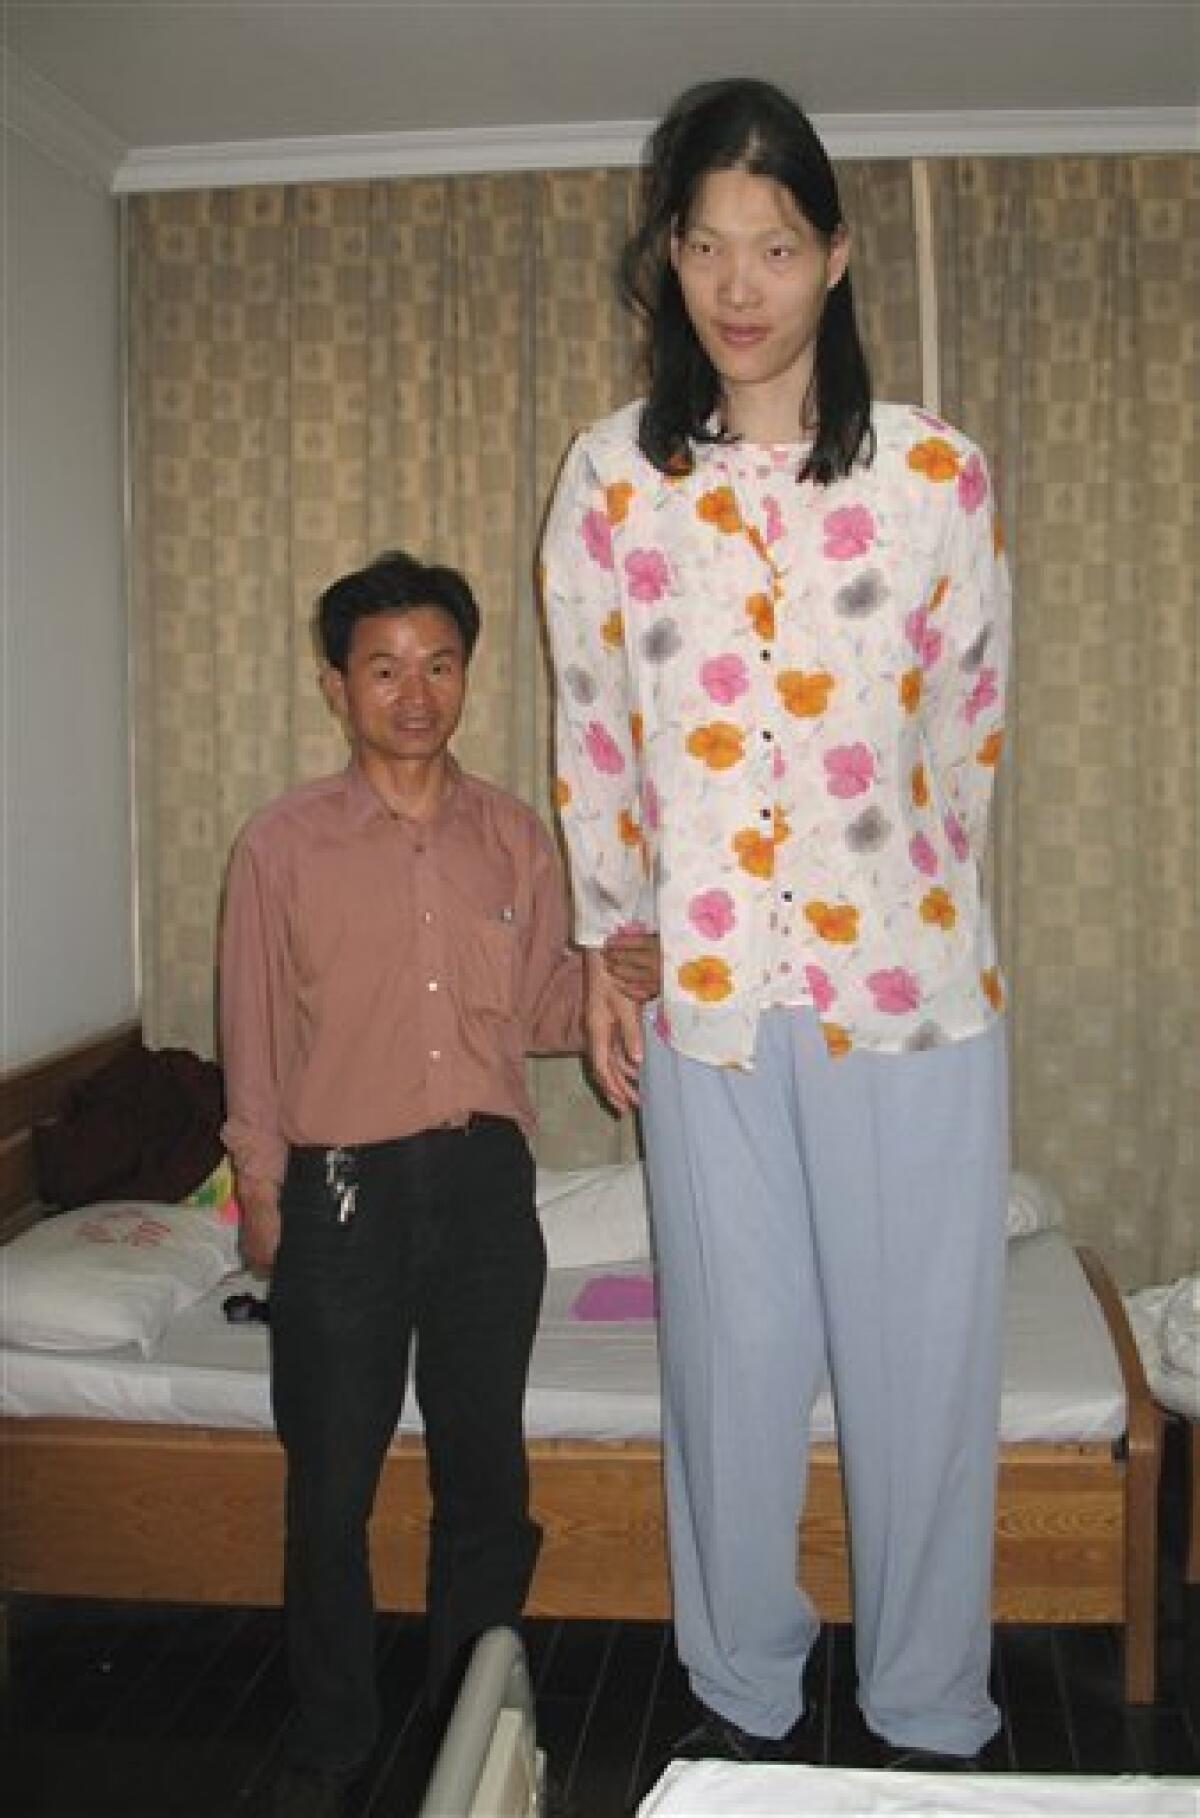 World's tallest woman dies in China at age 39 - The San Diego